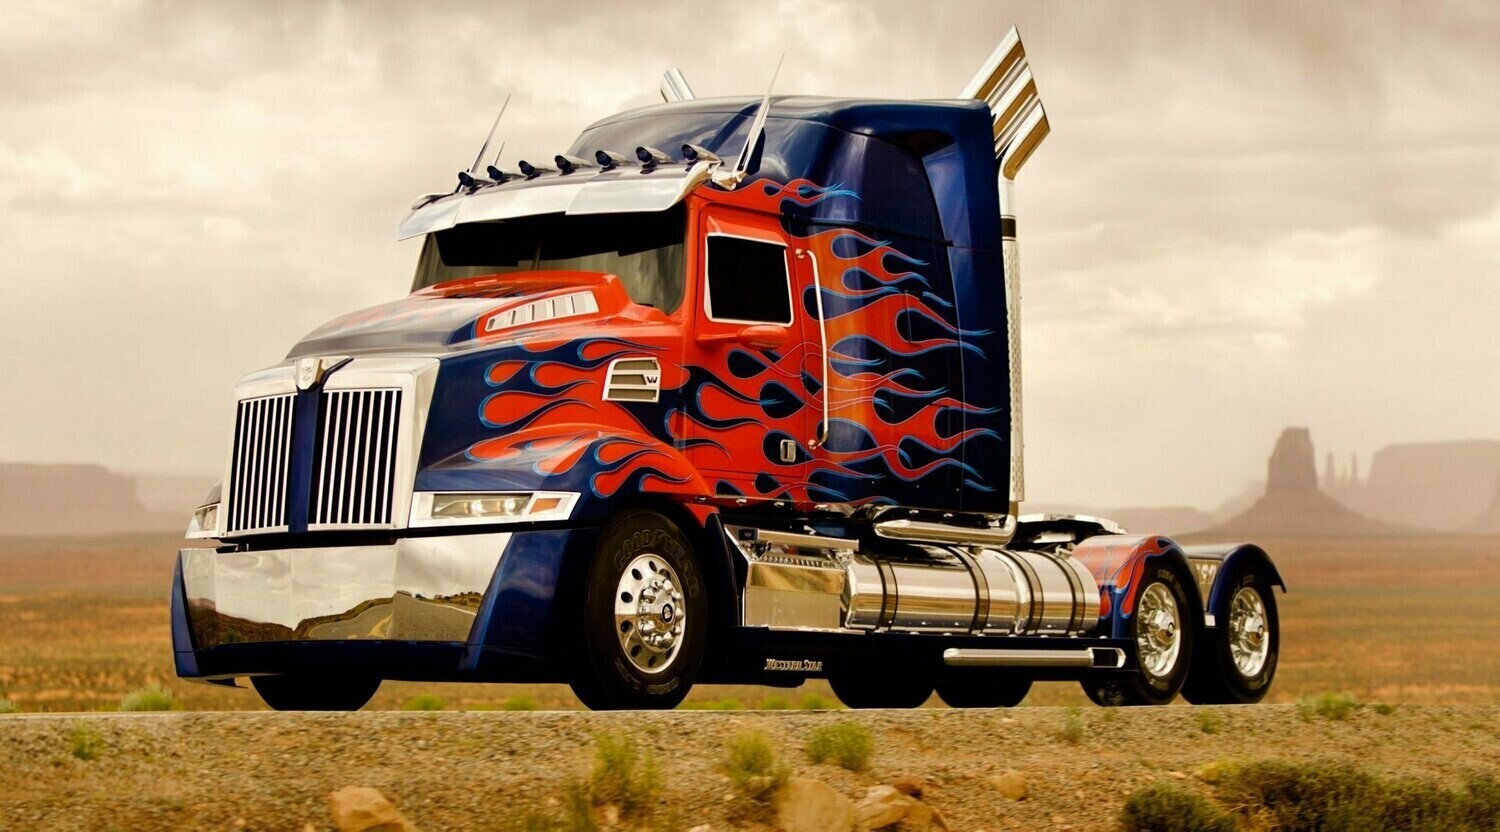 Big Trucks 01 - Full Drill Diamond Painting - Specially ordered for you. Delivery is approximately 4 - 6 weeks.